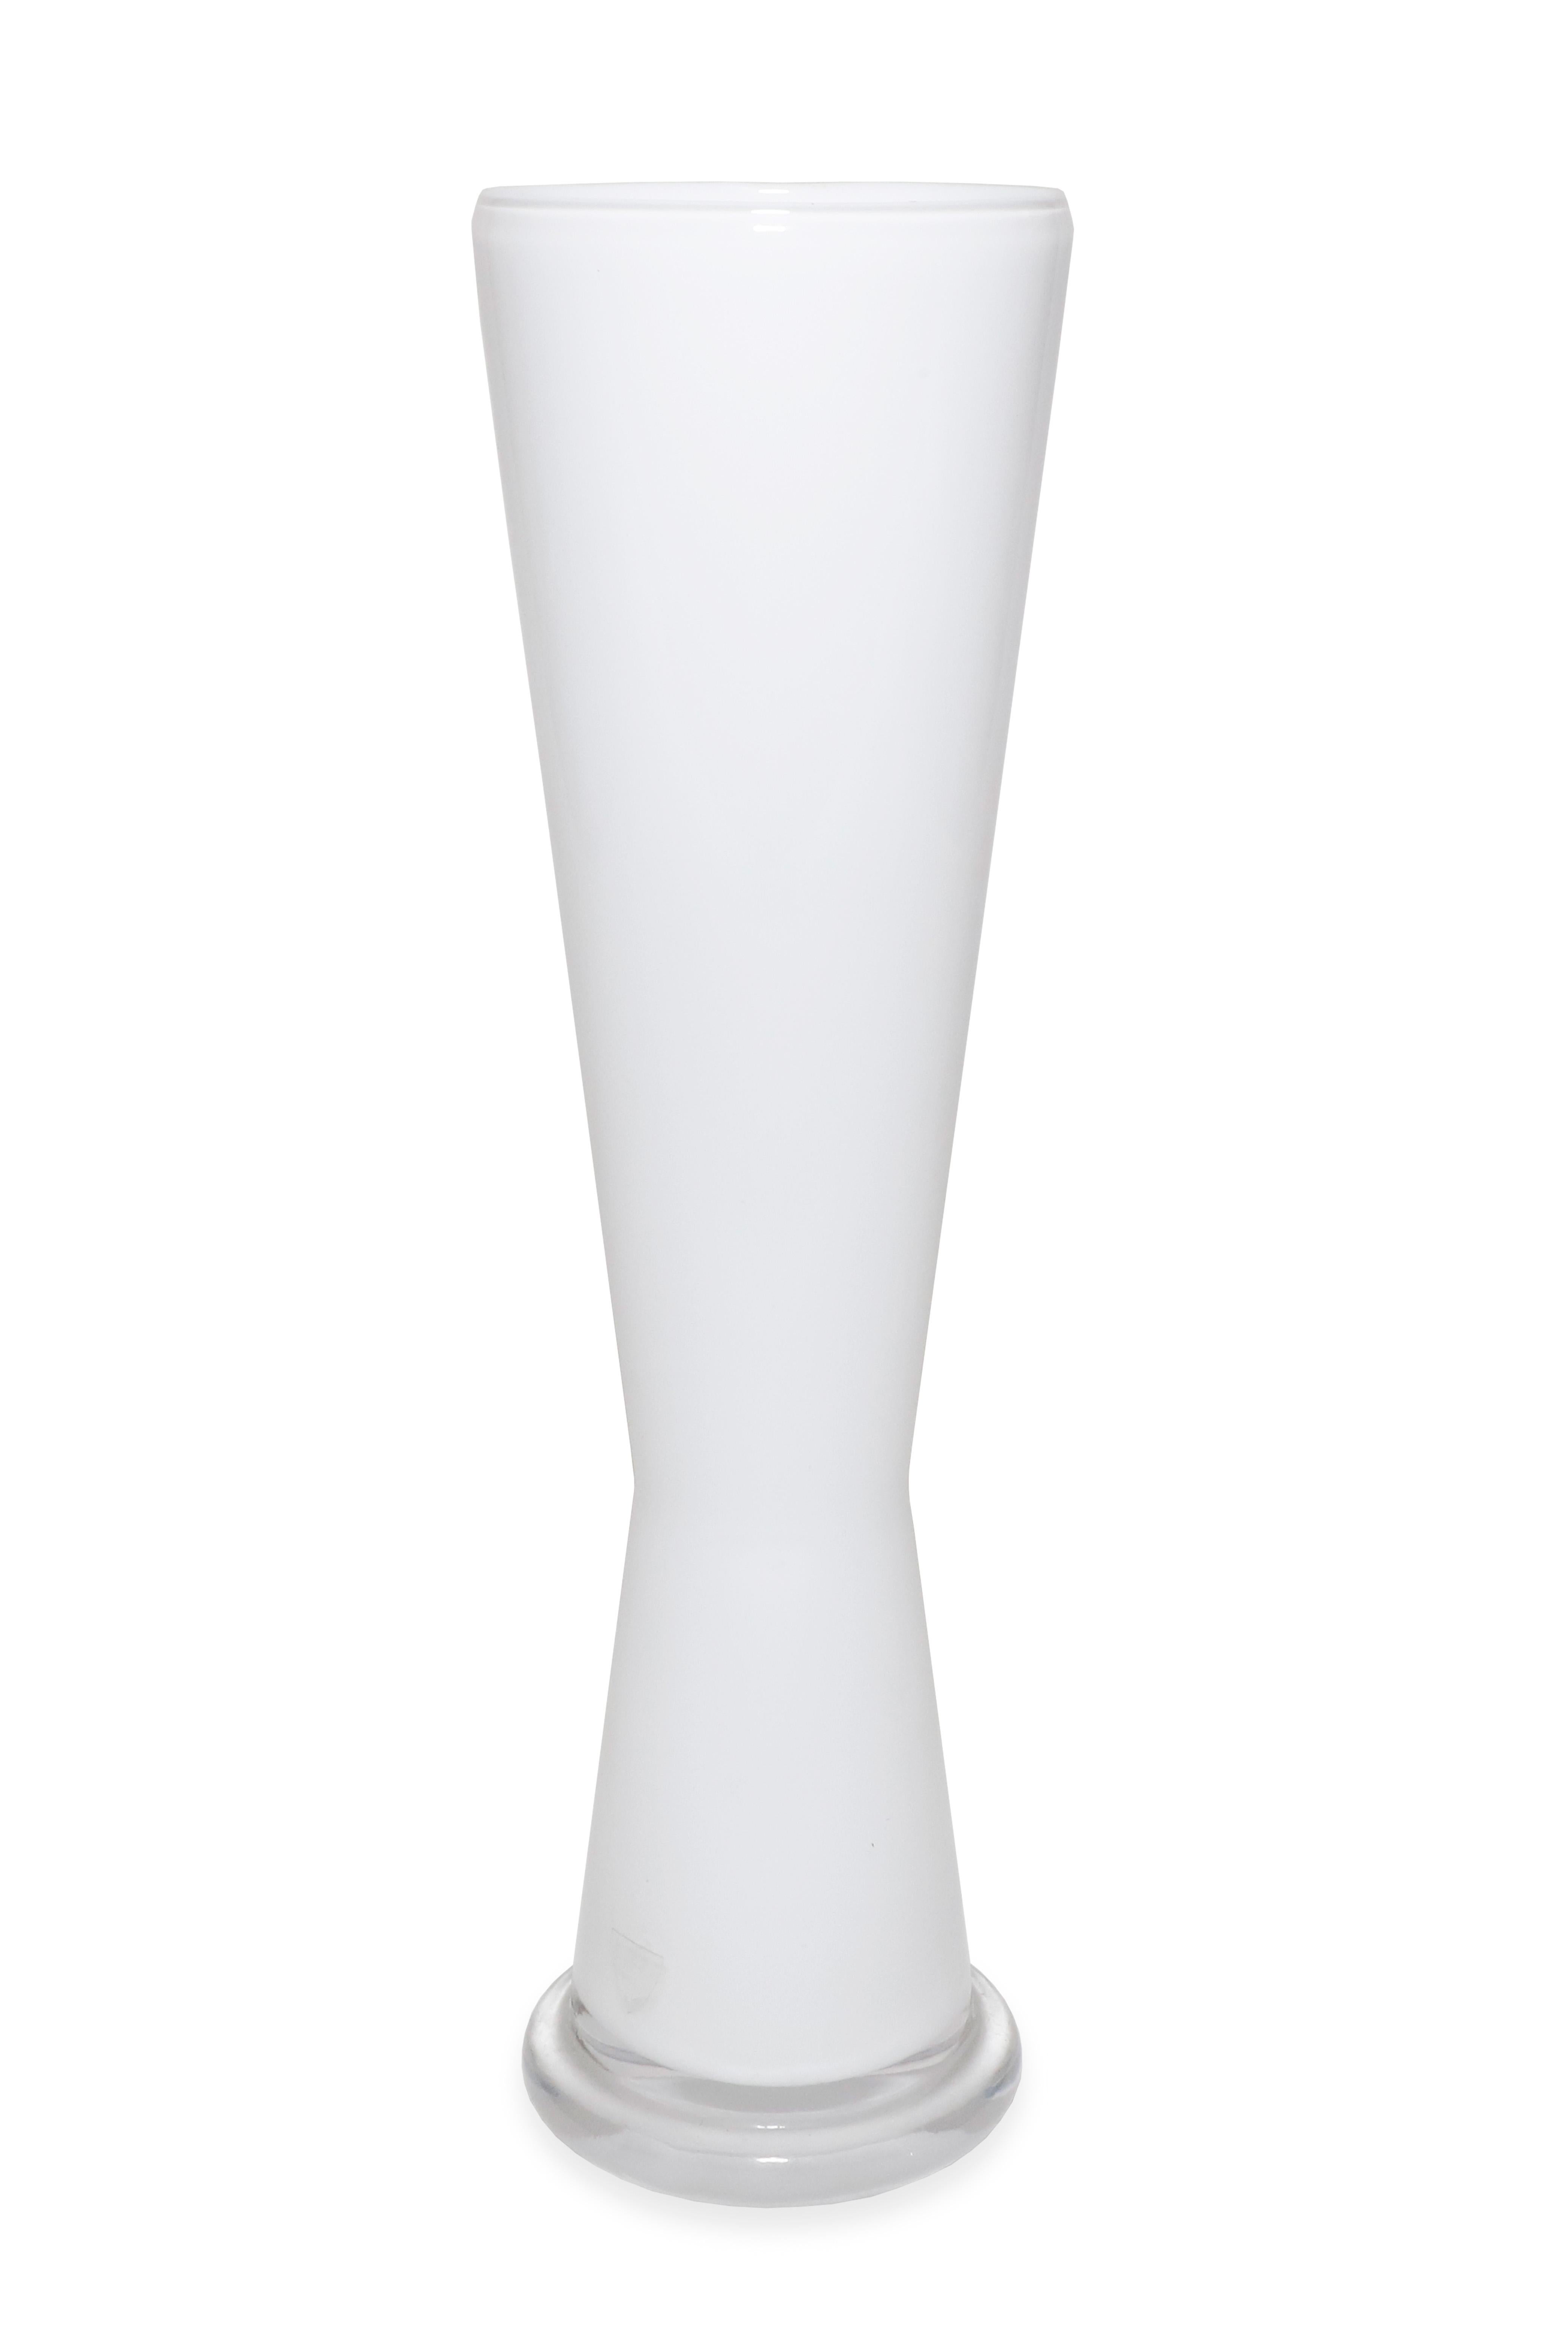 Amaryllis white art glass vase designed by the Swedish designer Erika Lagerbielke. Made by the Orrefros in the 1990s. a beutiful vase for a center piece on a table. 

Property from esteemed interior designer Juan Montoya. Juan Montoya is one of